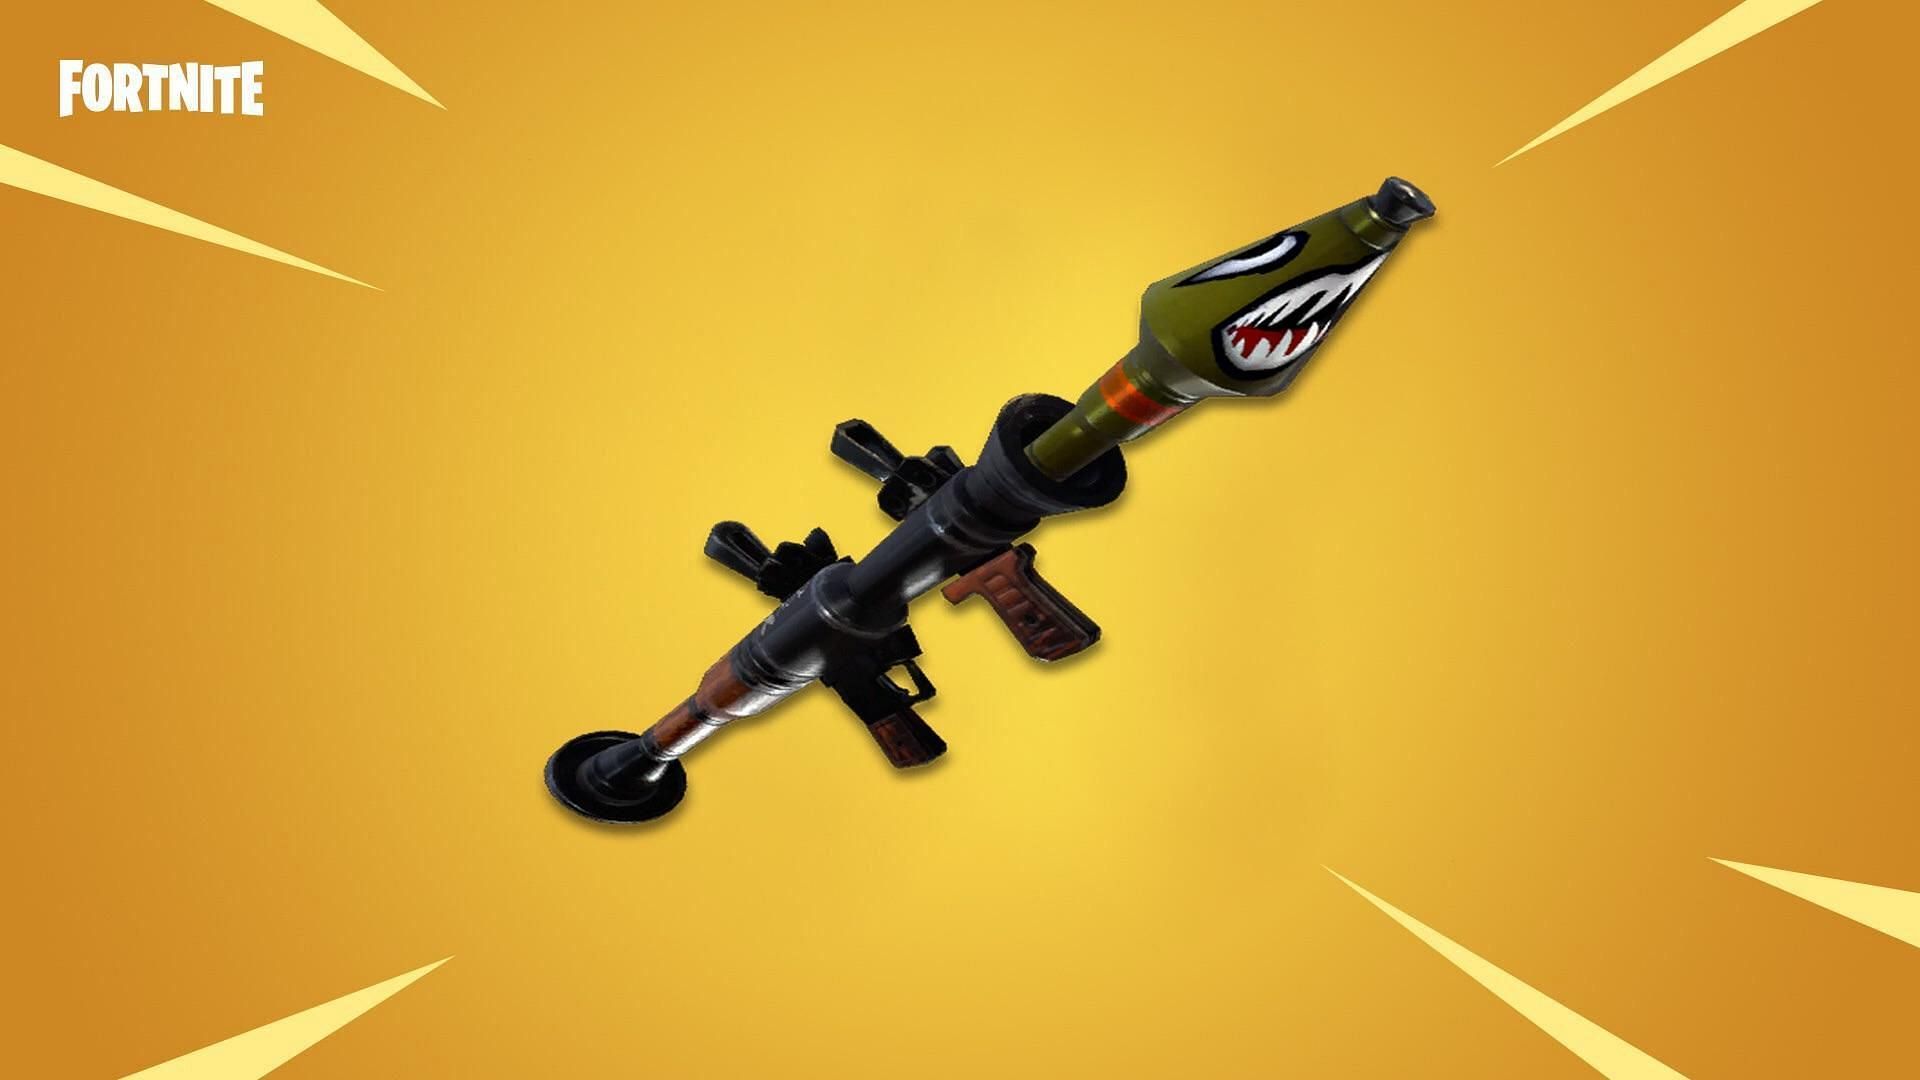 The high damage dealing Rocket Launcher is back in Fortnite and players can find it from Supply Drops in a particular game mode (Image via Epic Games)